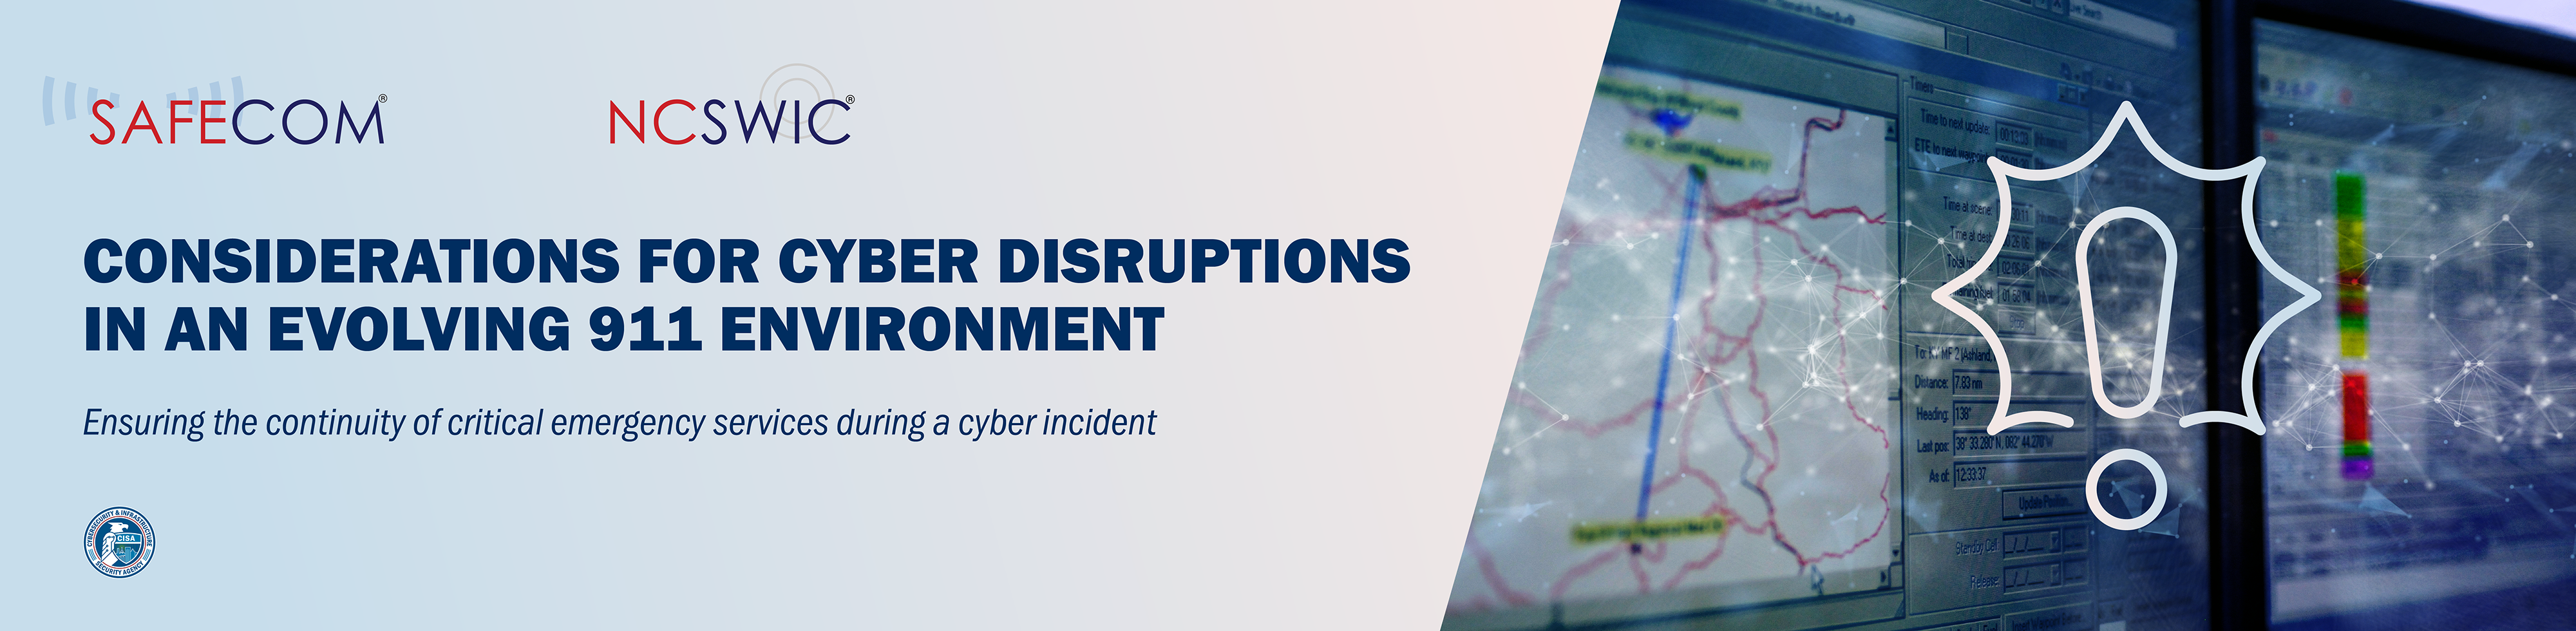 SAFECOM - NCSWIC - Considerations for Cyber Disruption in an Evolving 911 Environment. Ensuring the continuity of critical emergency services during a cyber incident 